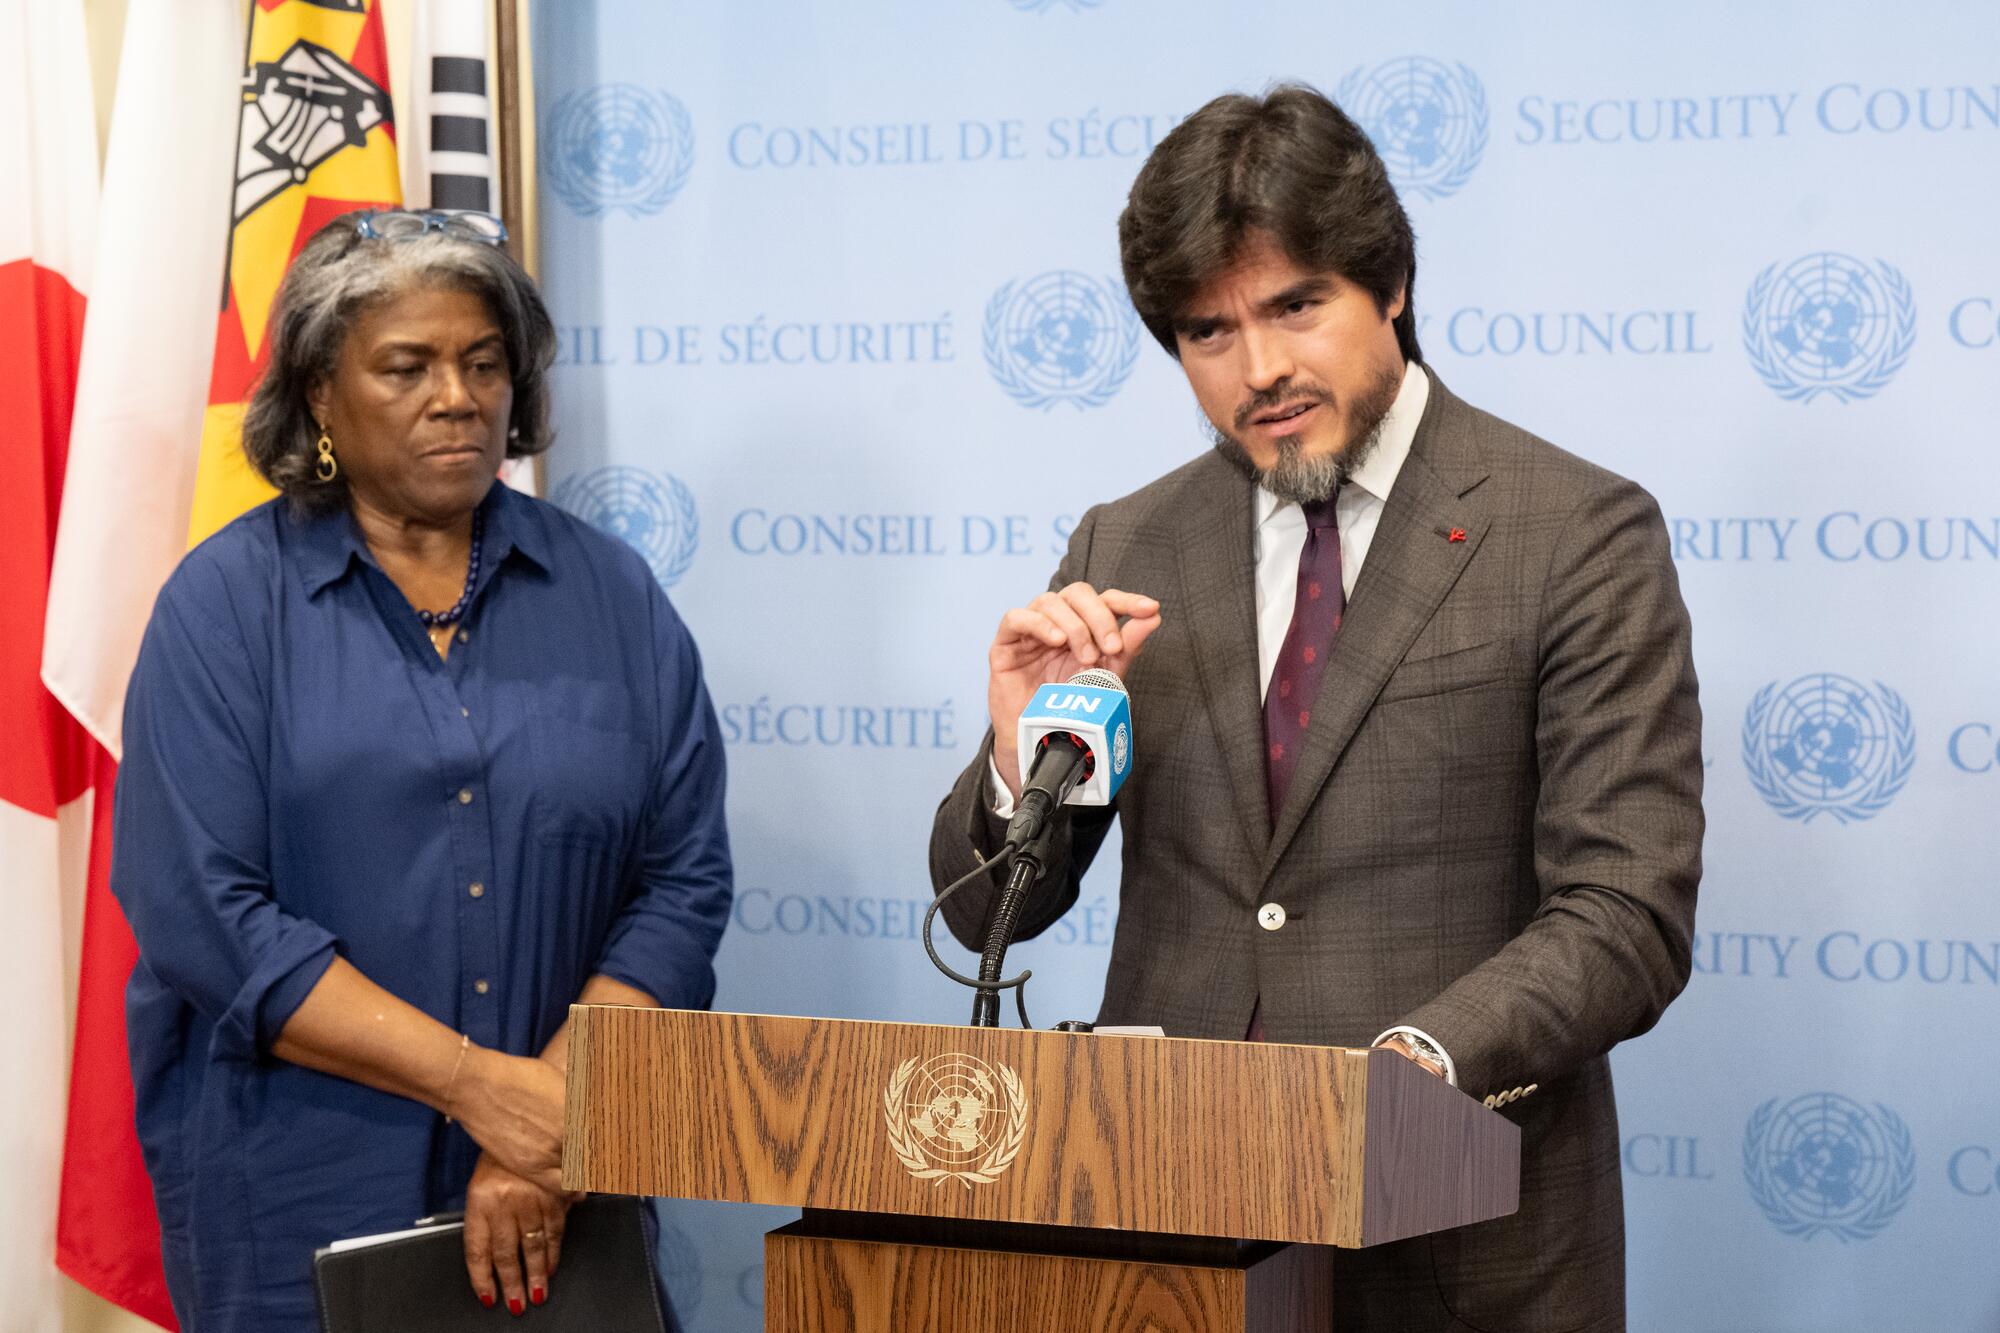 José Javier De La Gasca (at podium), Permanent Representative of Ecuador to the United Nations, briefs reporters on the mandate renewal of the United Nations Integrated Office in Haiti (BINUH). At left is Linda Thomas-Greenfield, Permanent Representative of the United States to the United Nations.